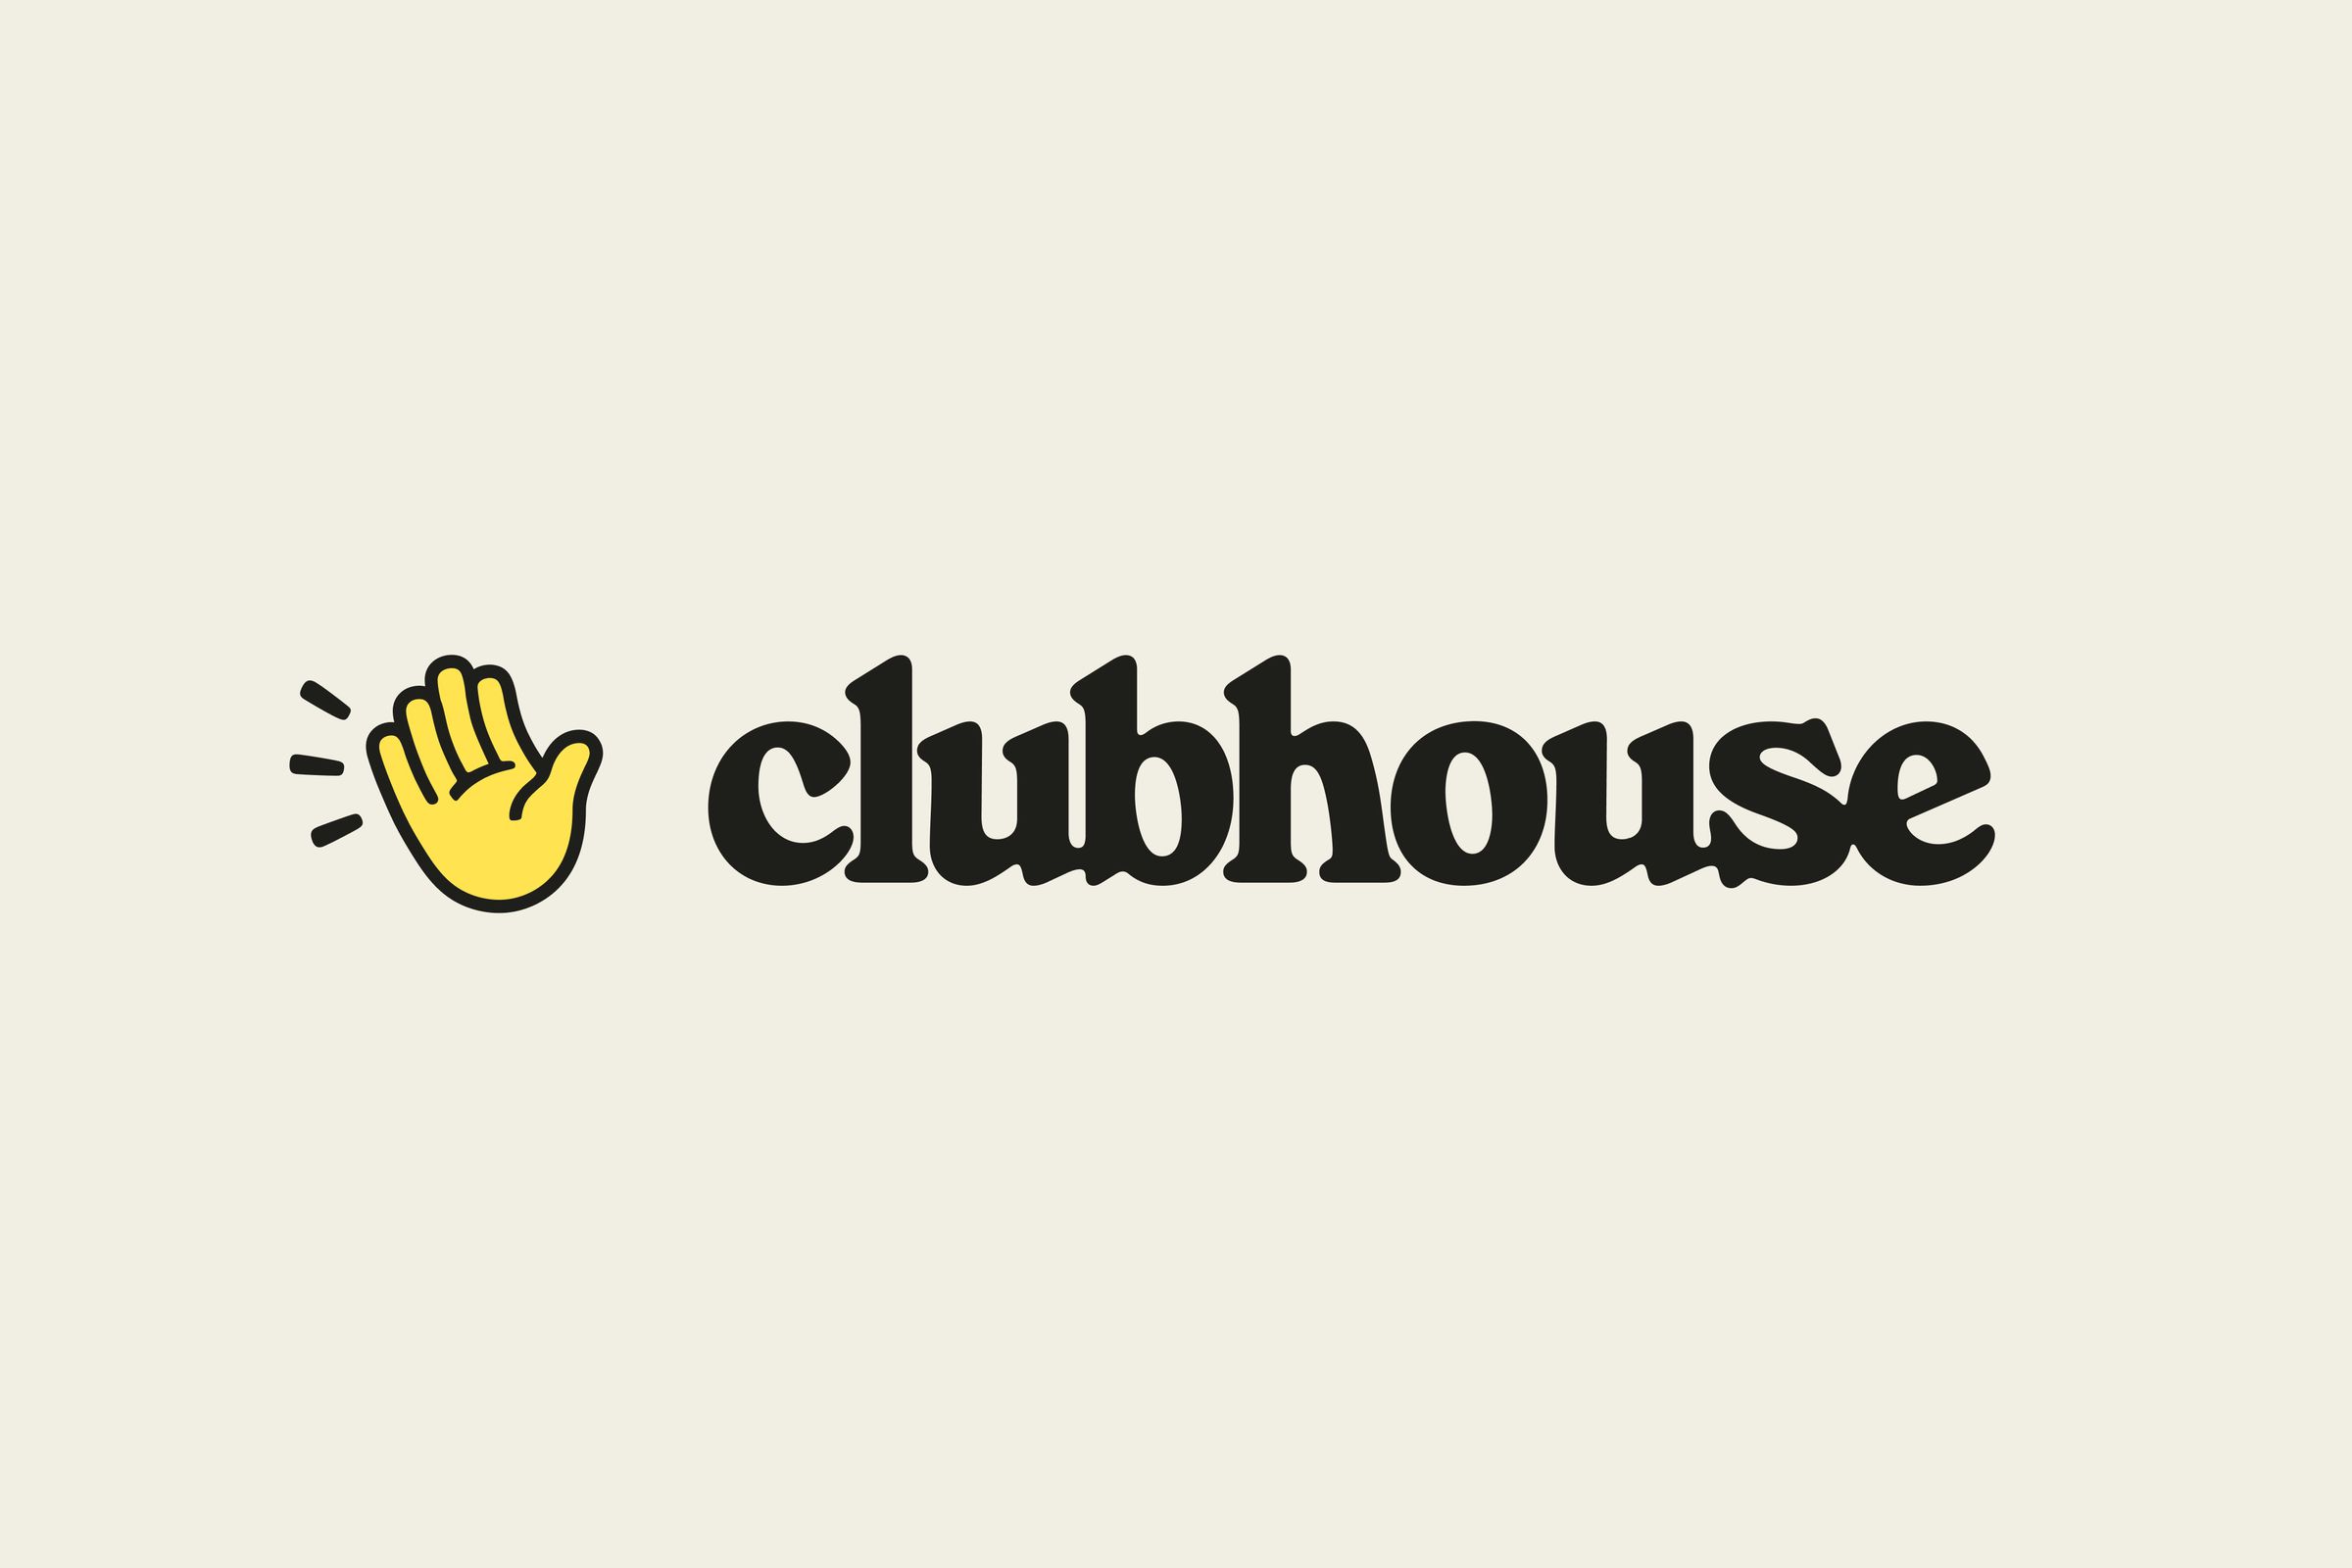 An image showing the Clubhouse logo